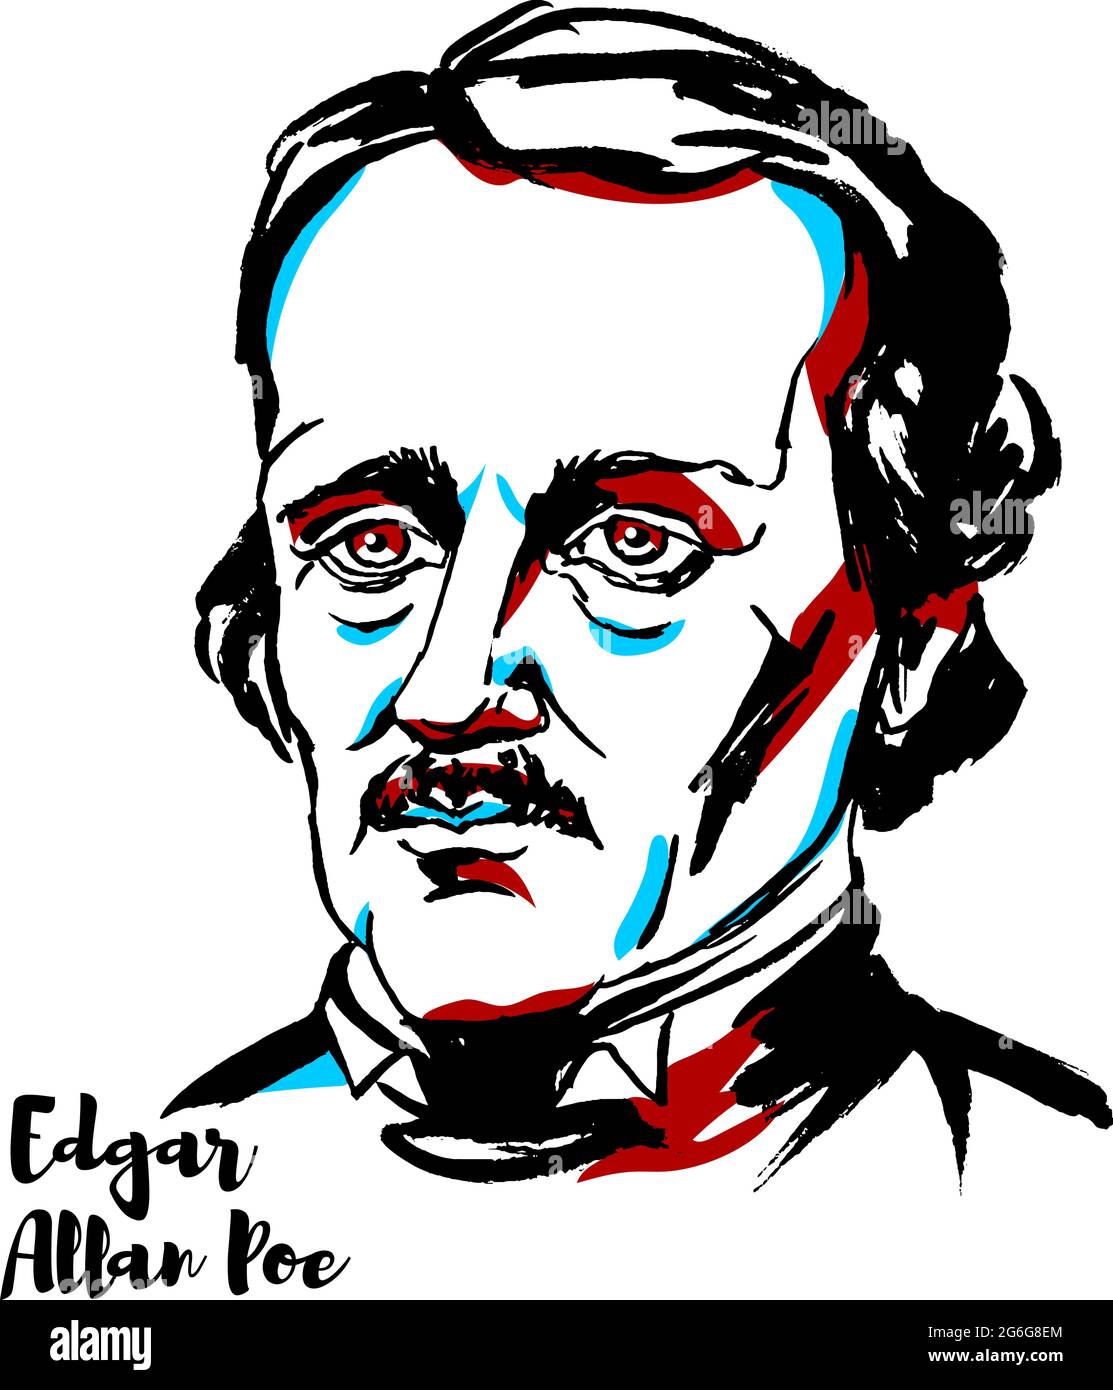 Edgar Allan Poe engraved vector portrait with ink contours. American writer, editor, and literary critic. Stock Vector